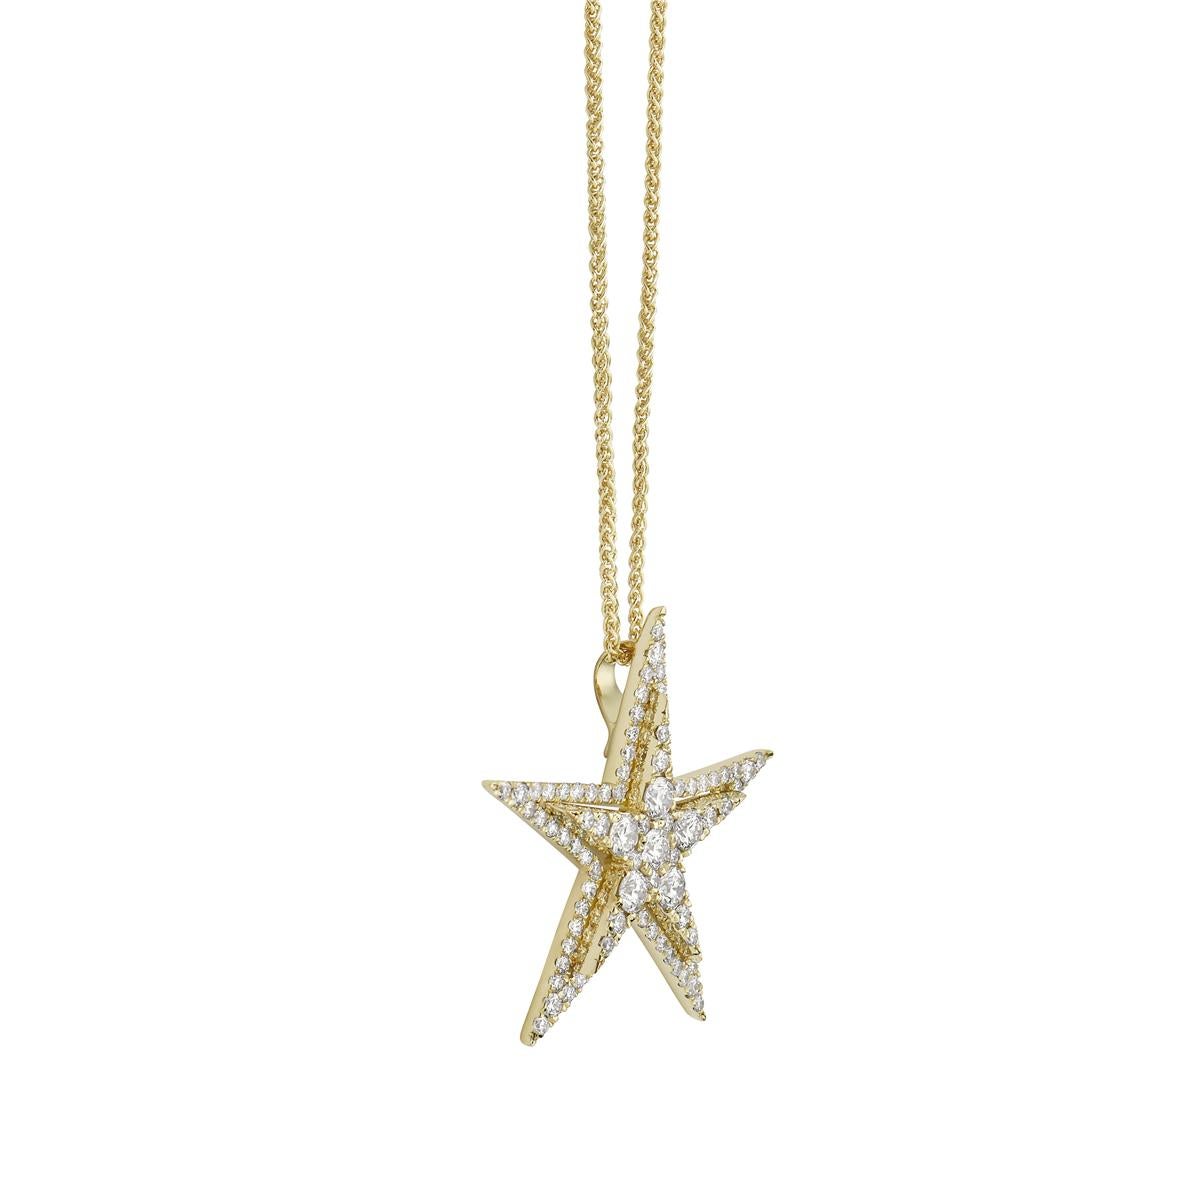 This star pendant shines bright with 96 round VS2, G color diamonds that total 0.87 carats. They are set in 2.5 grams of 18 karat yellow gold. This stunning 5 points star comes with an 18 karat yellow gold chain that can be worn at 3 different